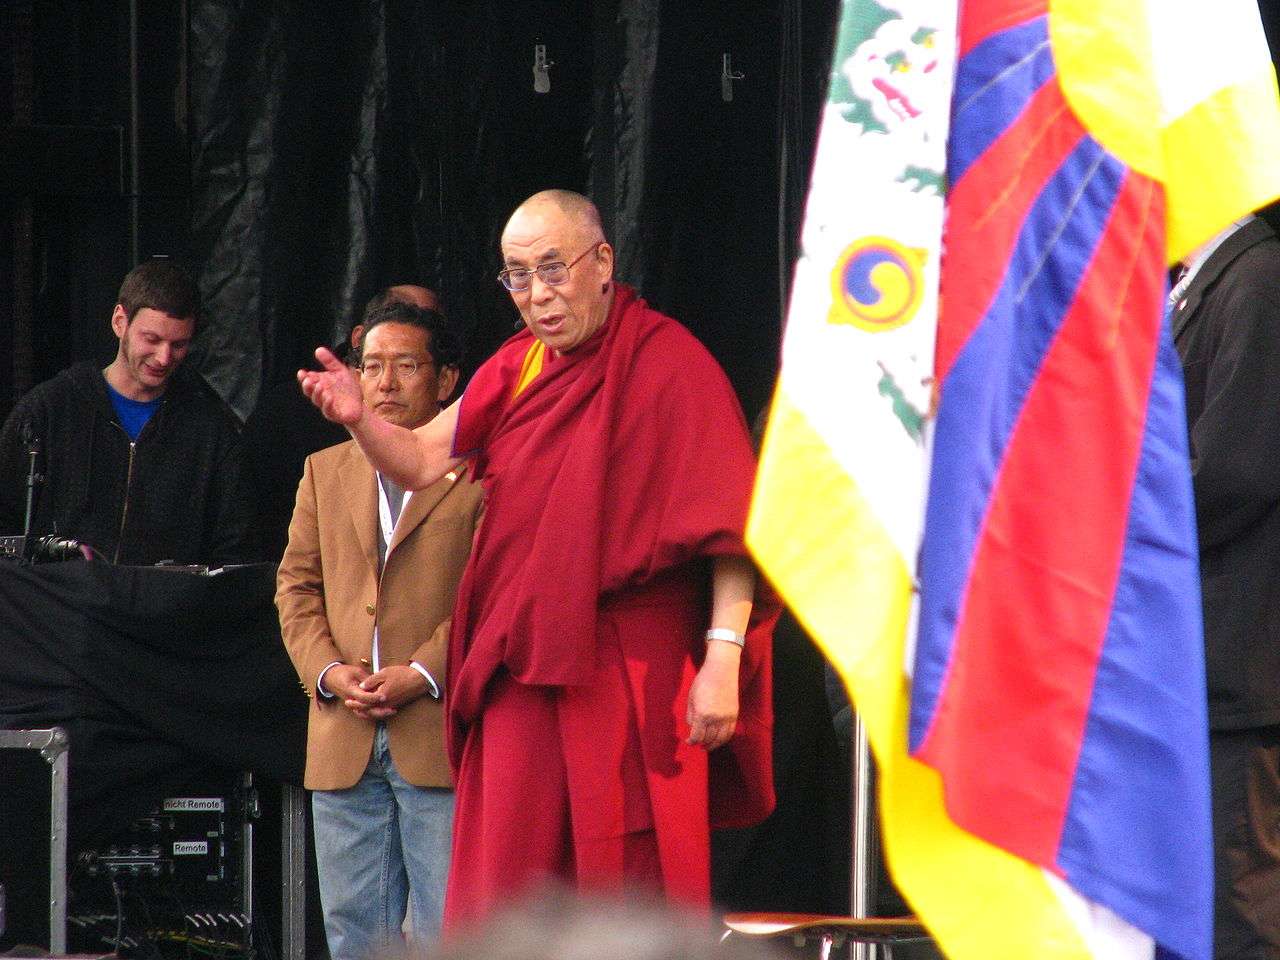 The flag of Tibet (designed by the 13th Dalai Lama) shares the stage with Kundun on 10 April 2010 in Zurich, Switzerland